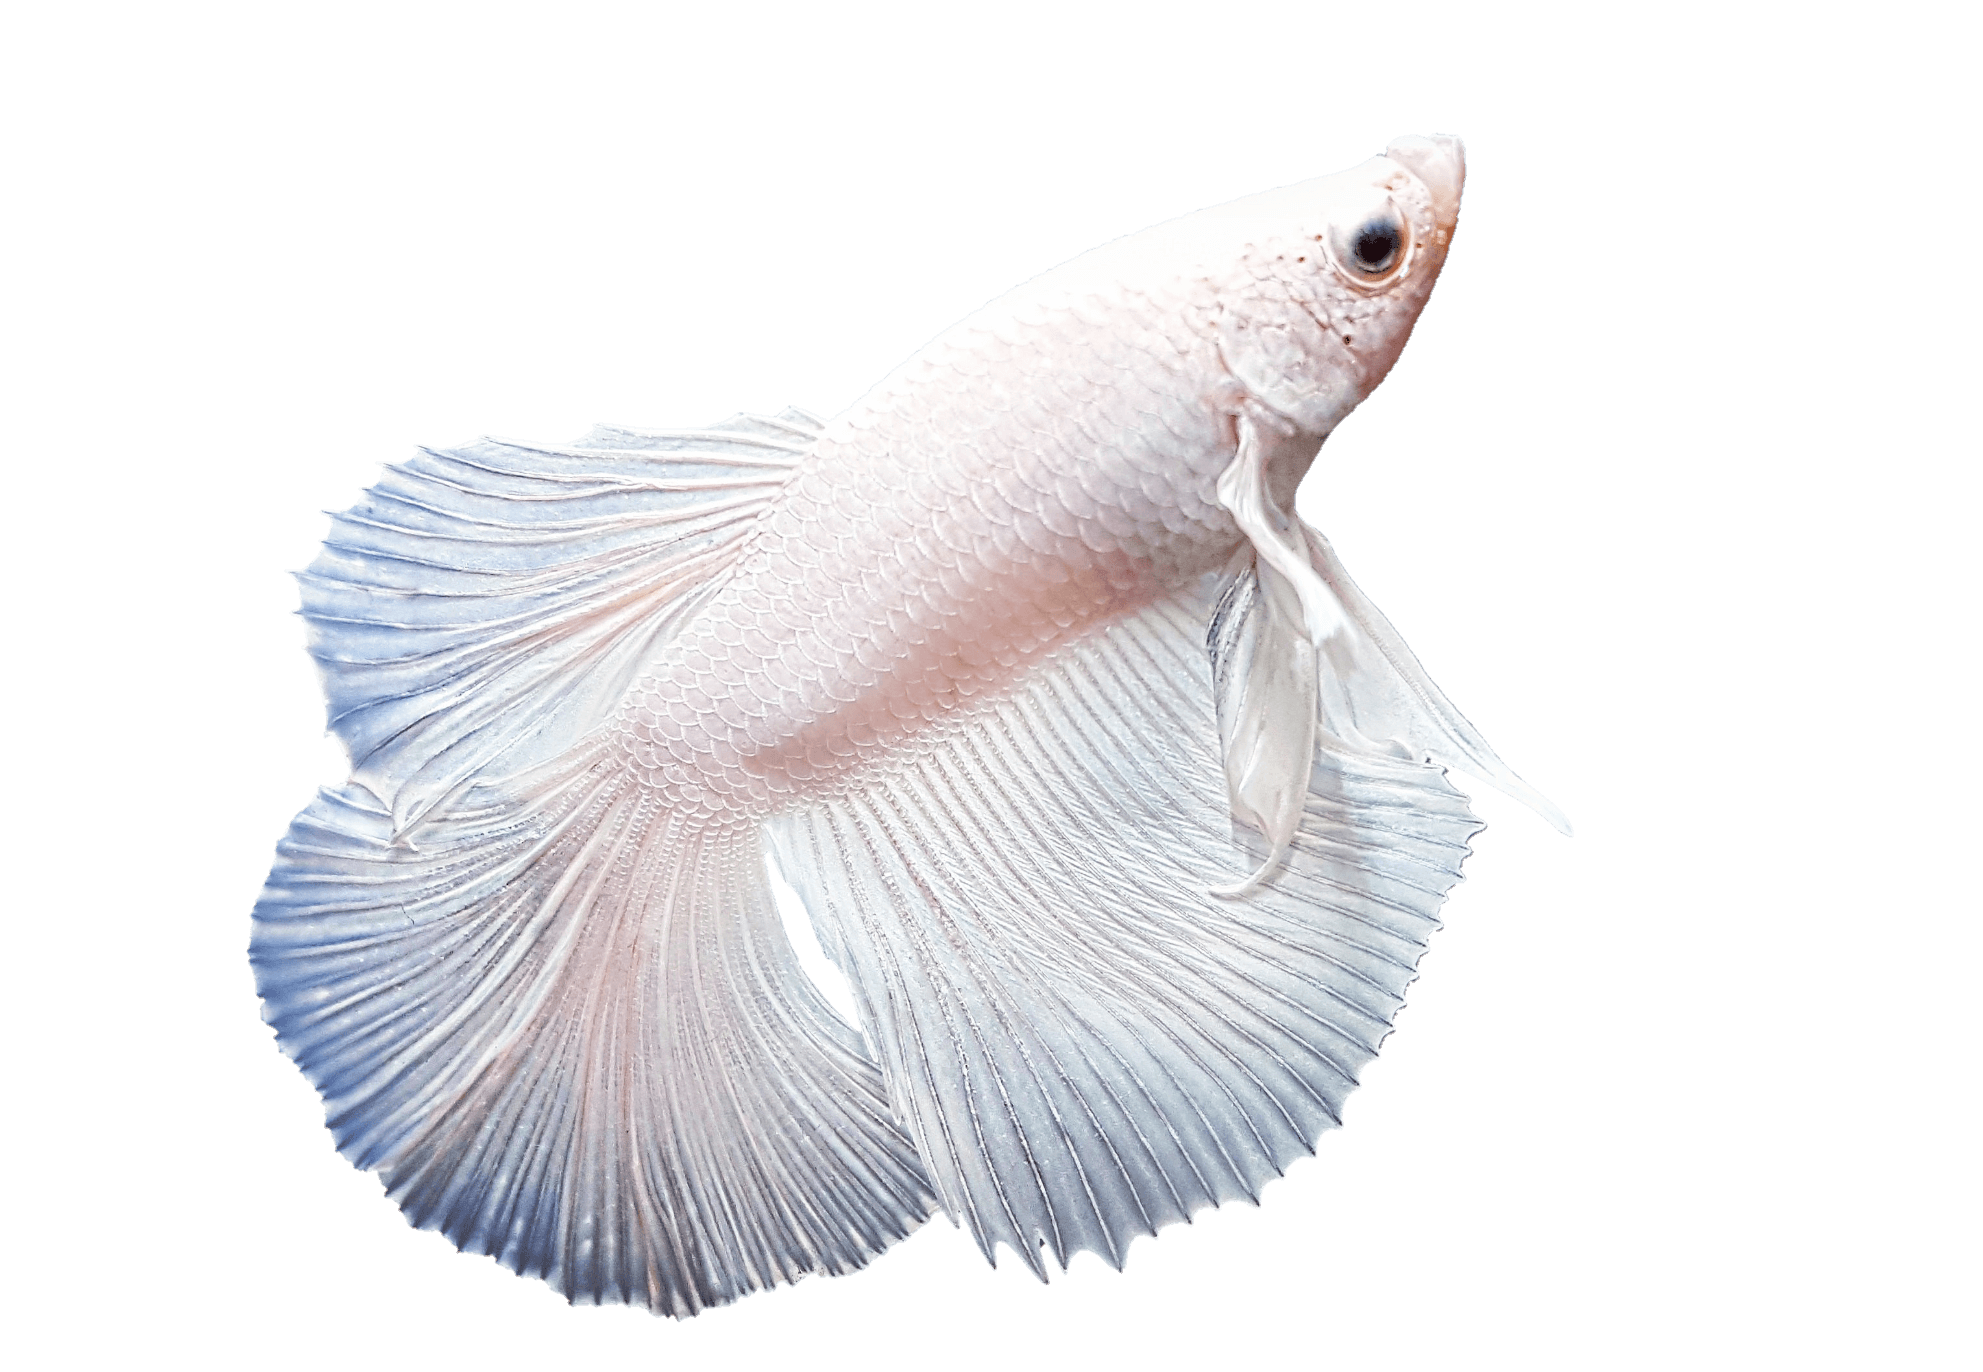 fish-png-from-pngfre-1